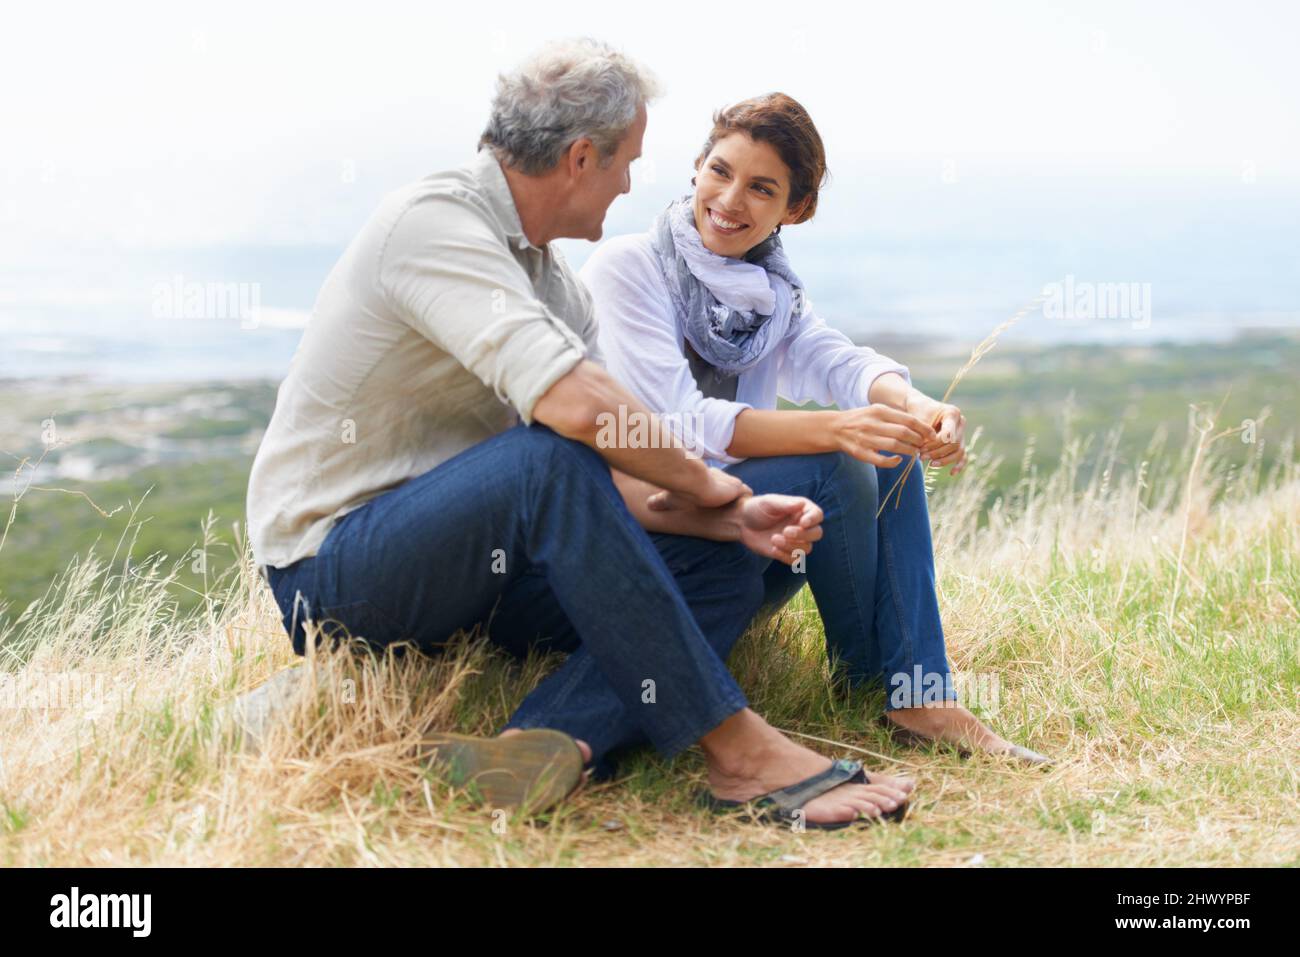 Appreciating one another. A happy mature couple with their heads together affectionately. Stock Photo